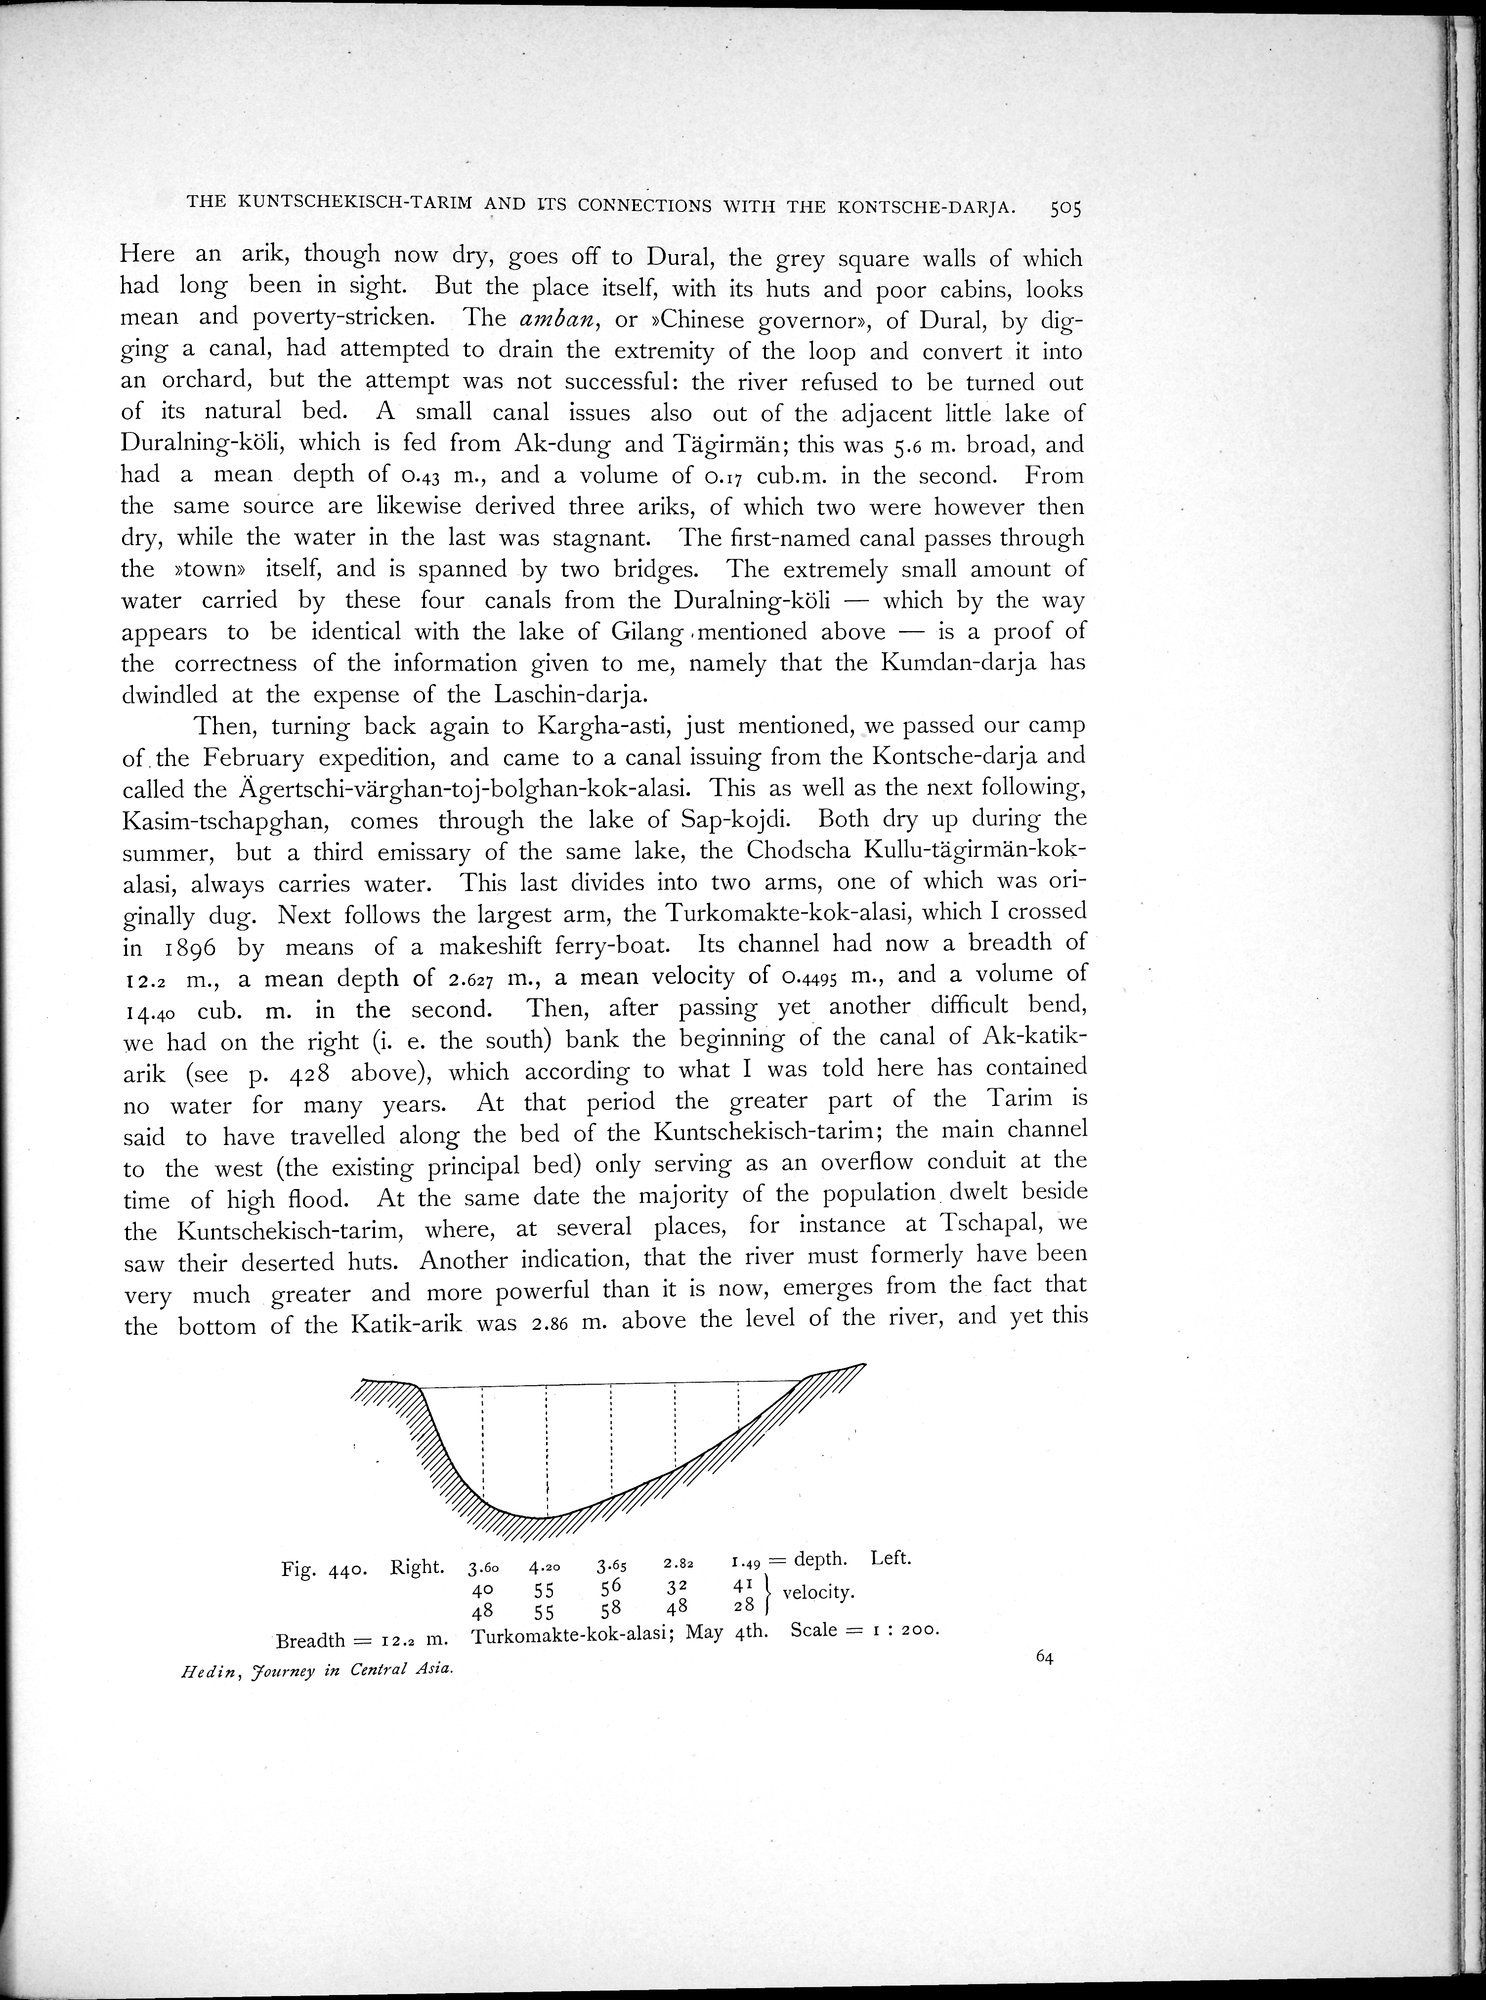 Scientific Results of a Journey in Central Asia, 1899-1902 : vol.1 / 639 ページ（白黒高解像度画像）